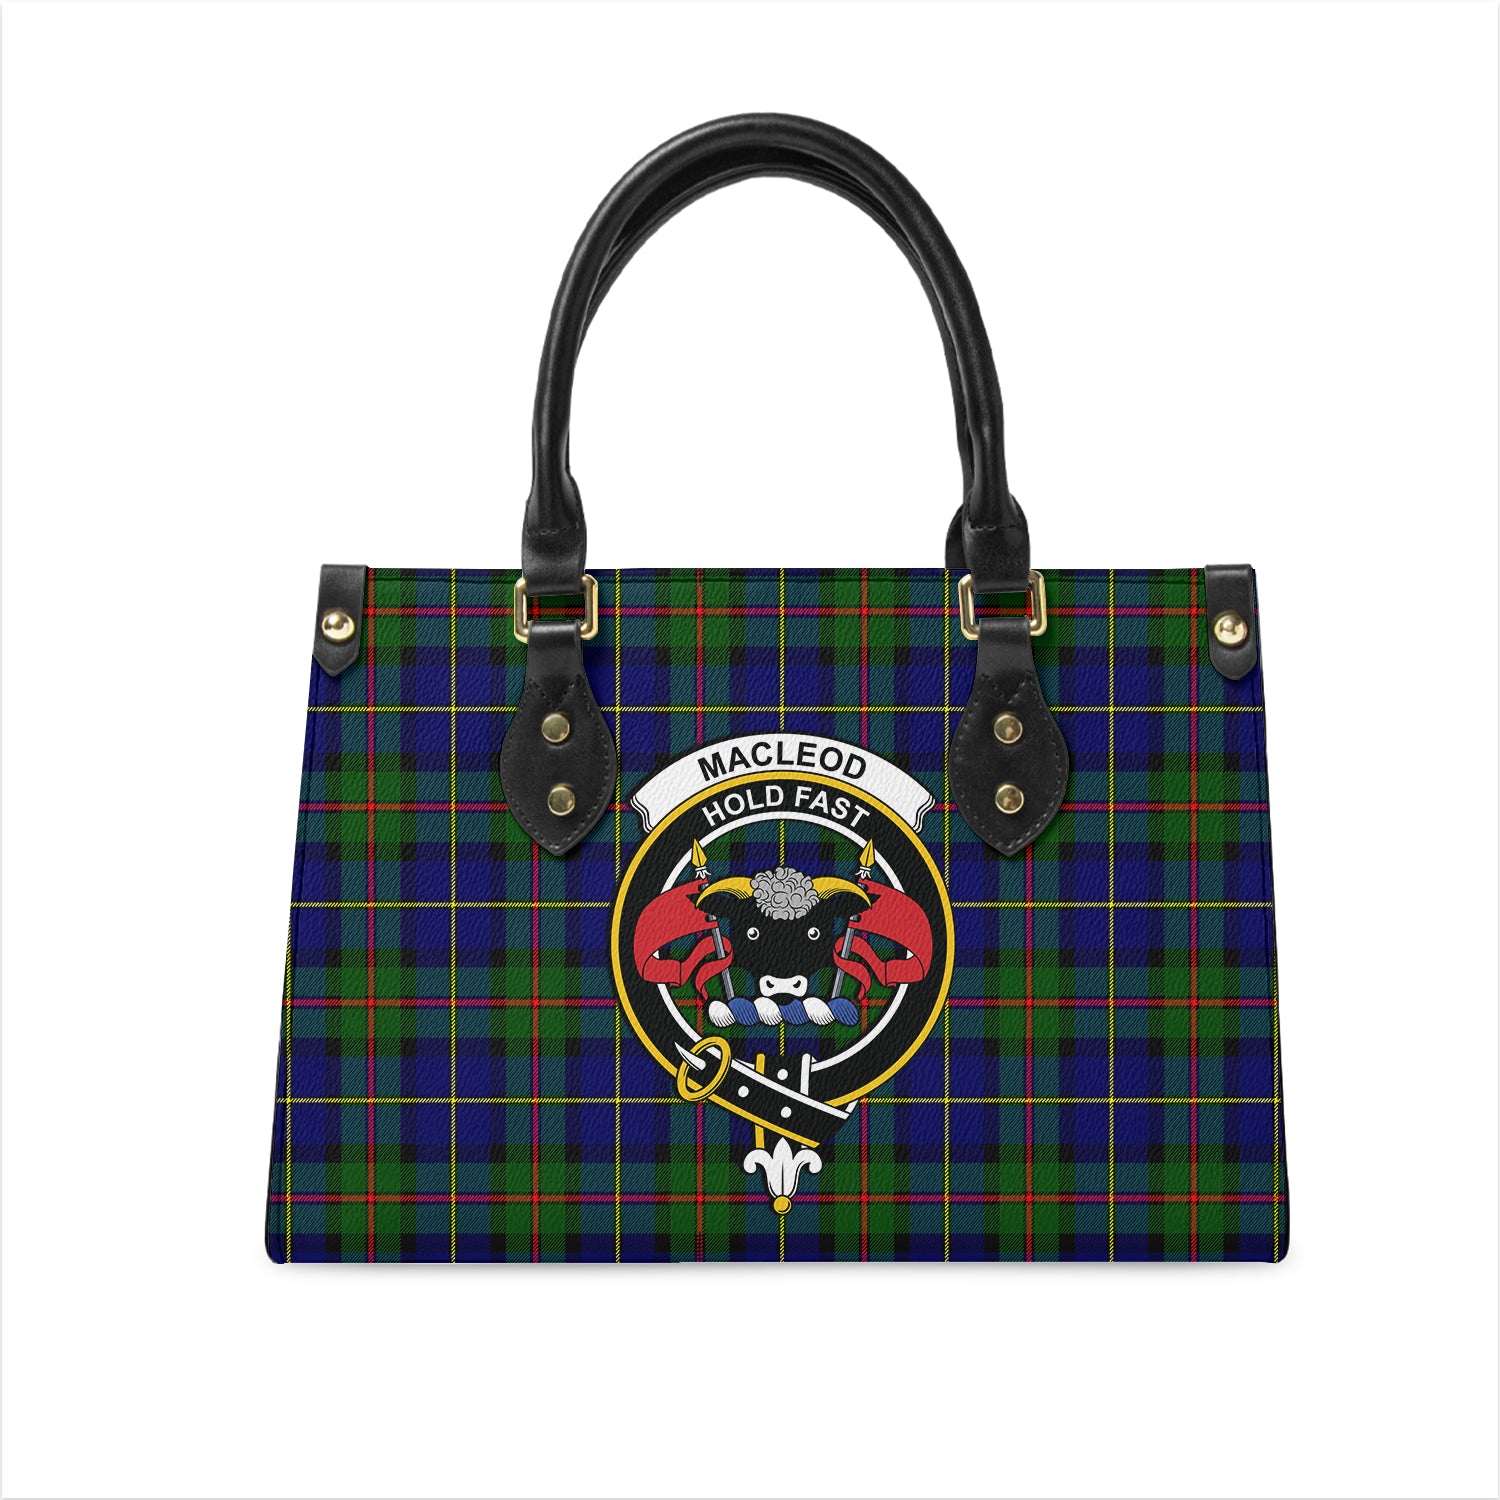 macleod-of-harris-modern-tartan-leather-bag-with-family-crest